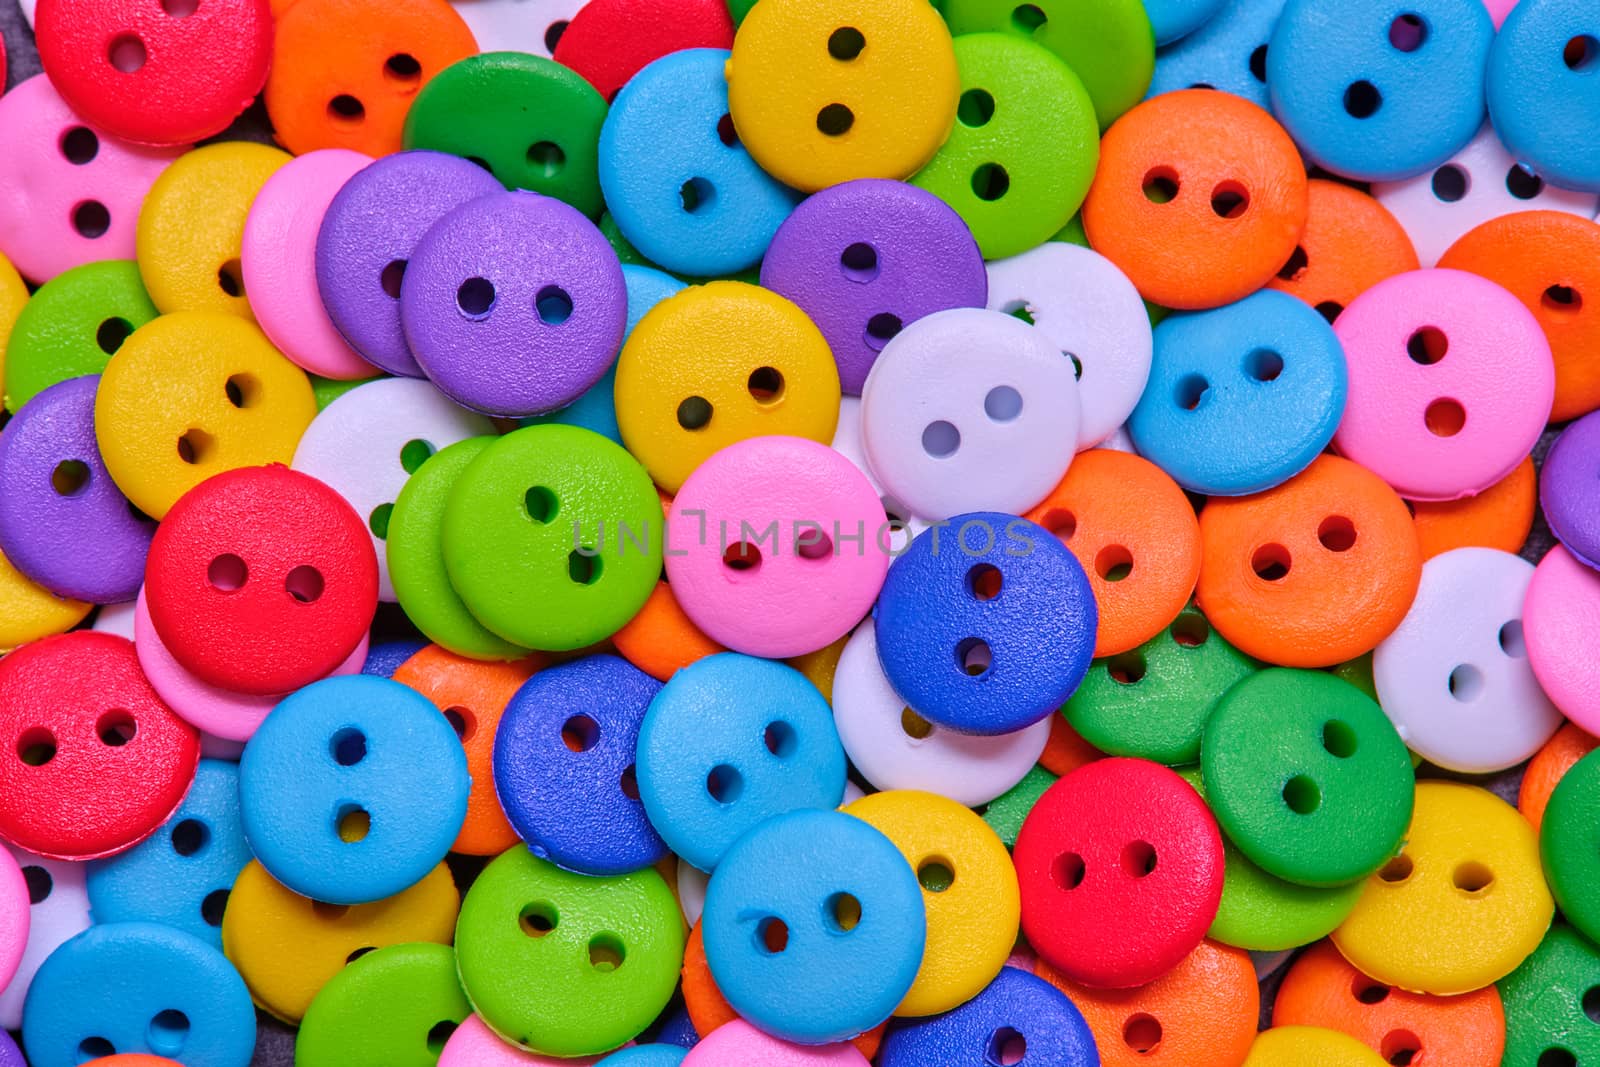 Various sewing Colorful plastic buttons as background.